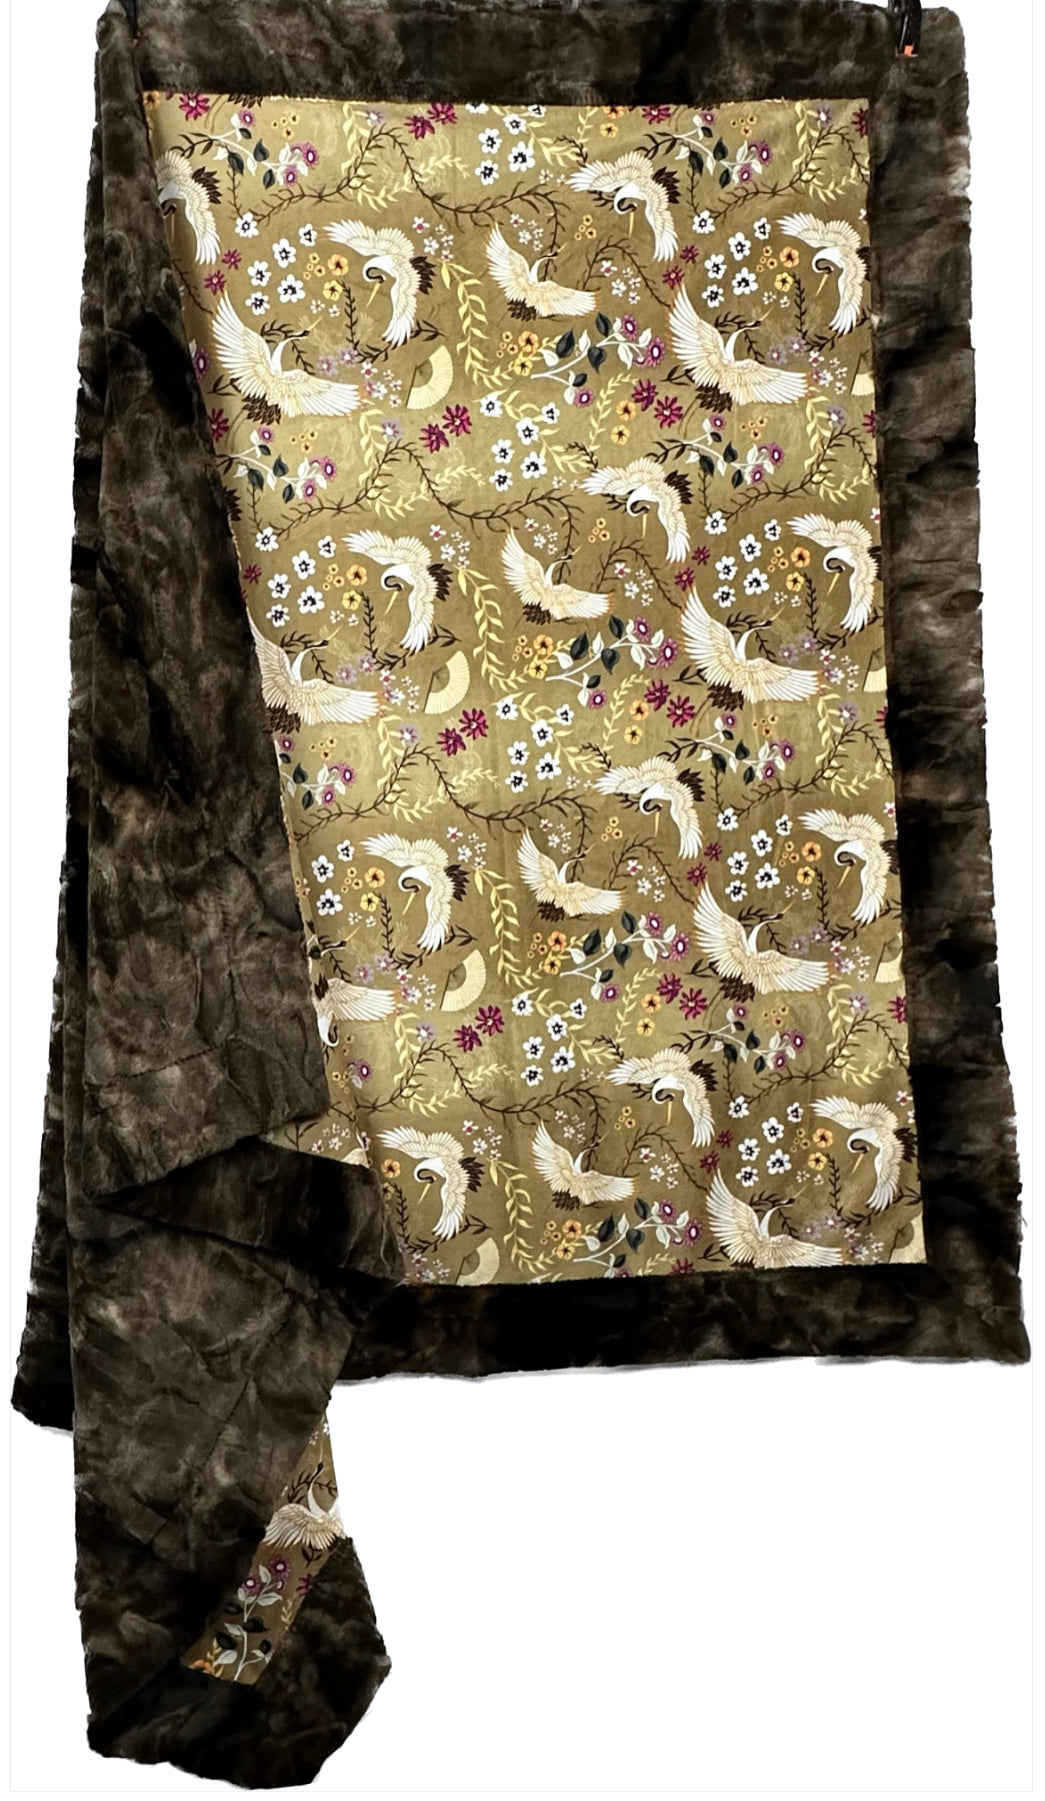 Cranes on Gold and Purple Flowers, Brown Rabbit Tie-Dye Adult Size Blanket 54x76 Spoonflower Quality